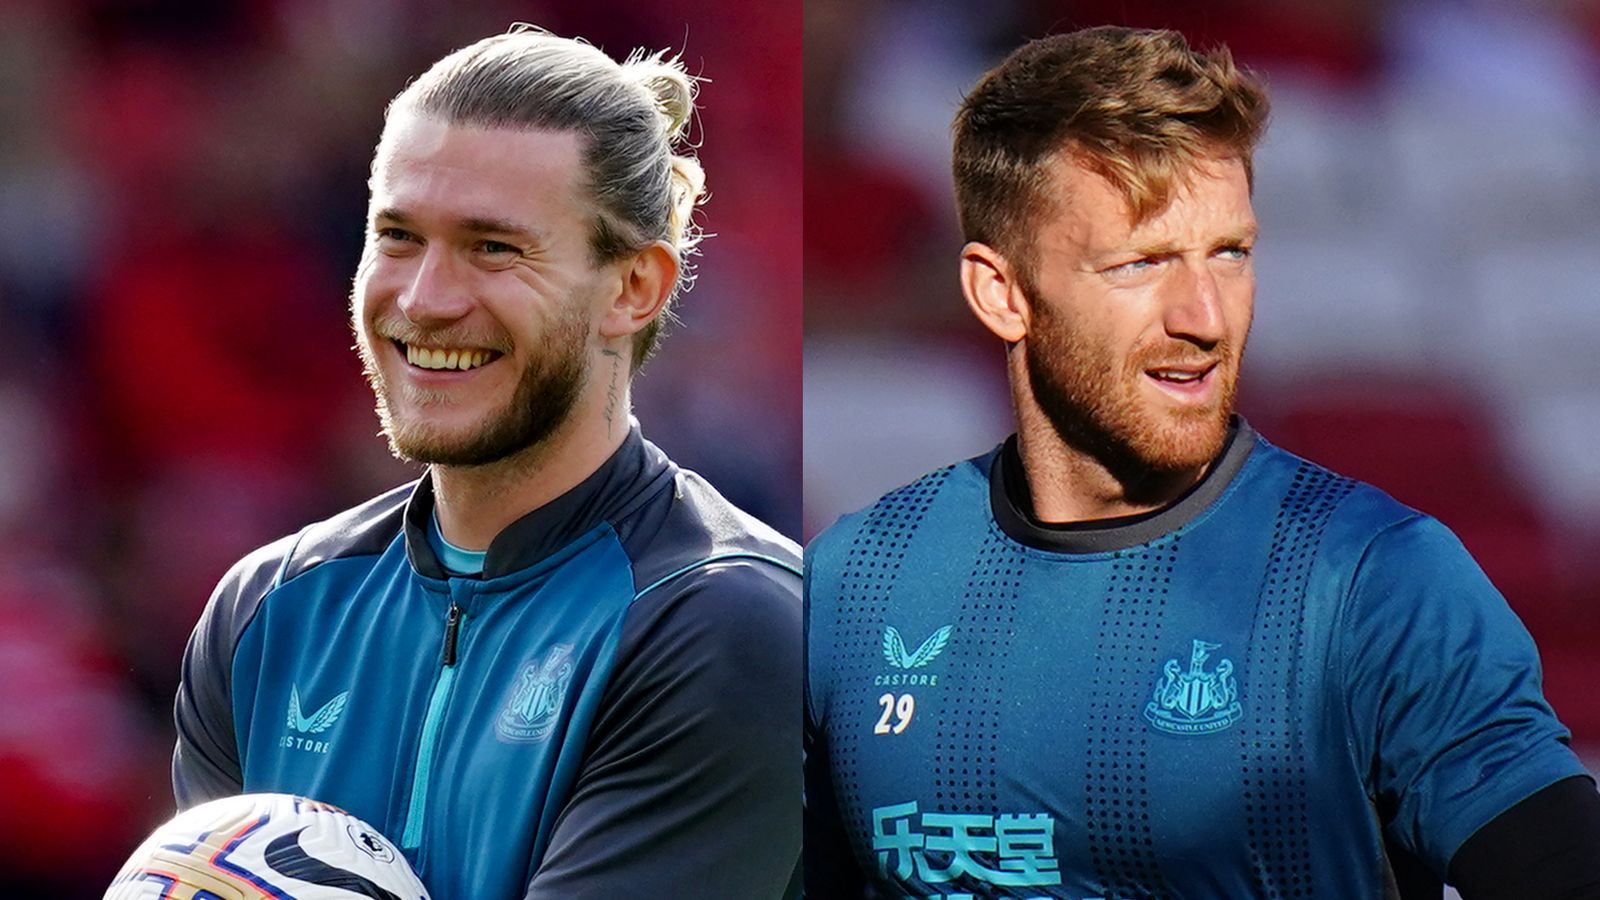 Newcastle goalkeeper crisis: Loris Karius or Mark Gillespie could start Carabao Cup final against Manchester United | Football News